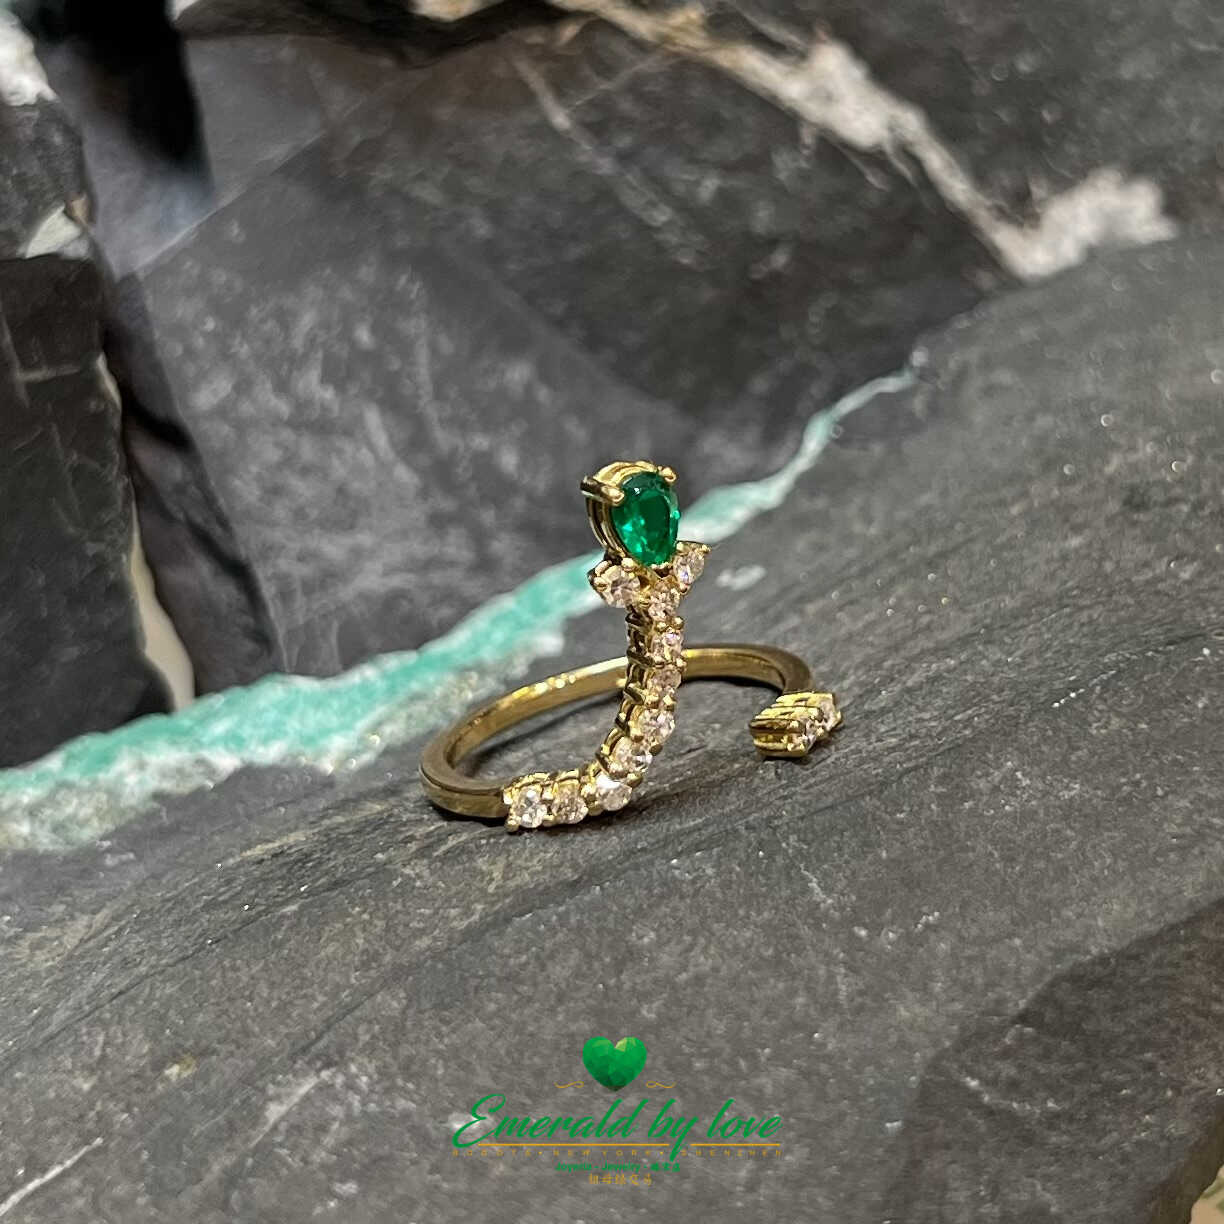 Elegant Yellow Gold Ring with 0.36 Ct Teardrop Emerald - A Touch of Natural Sophistication